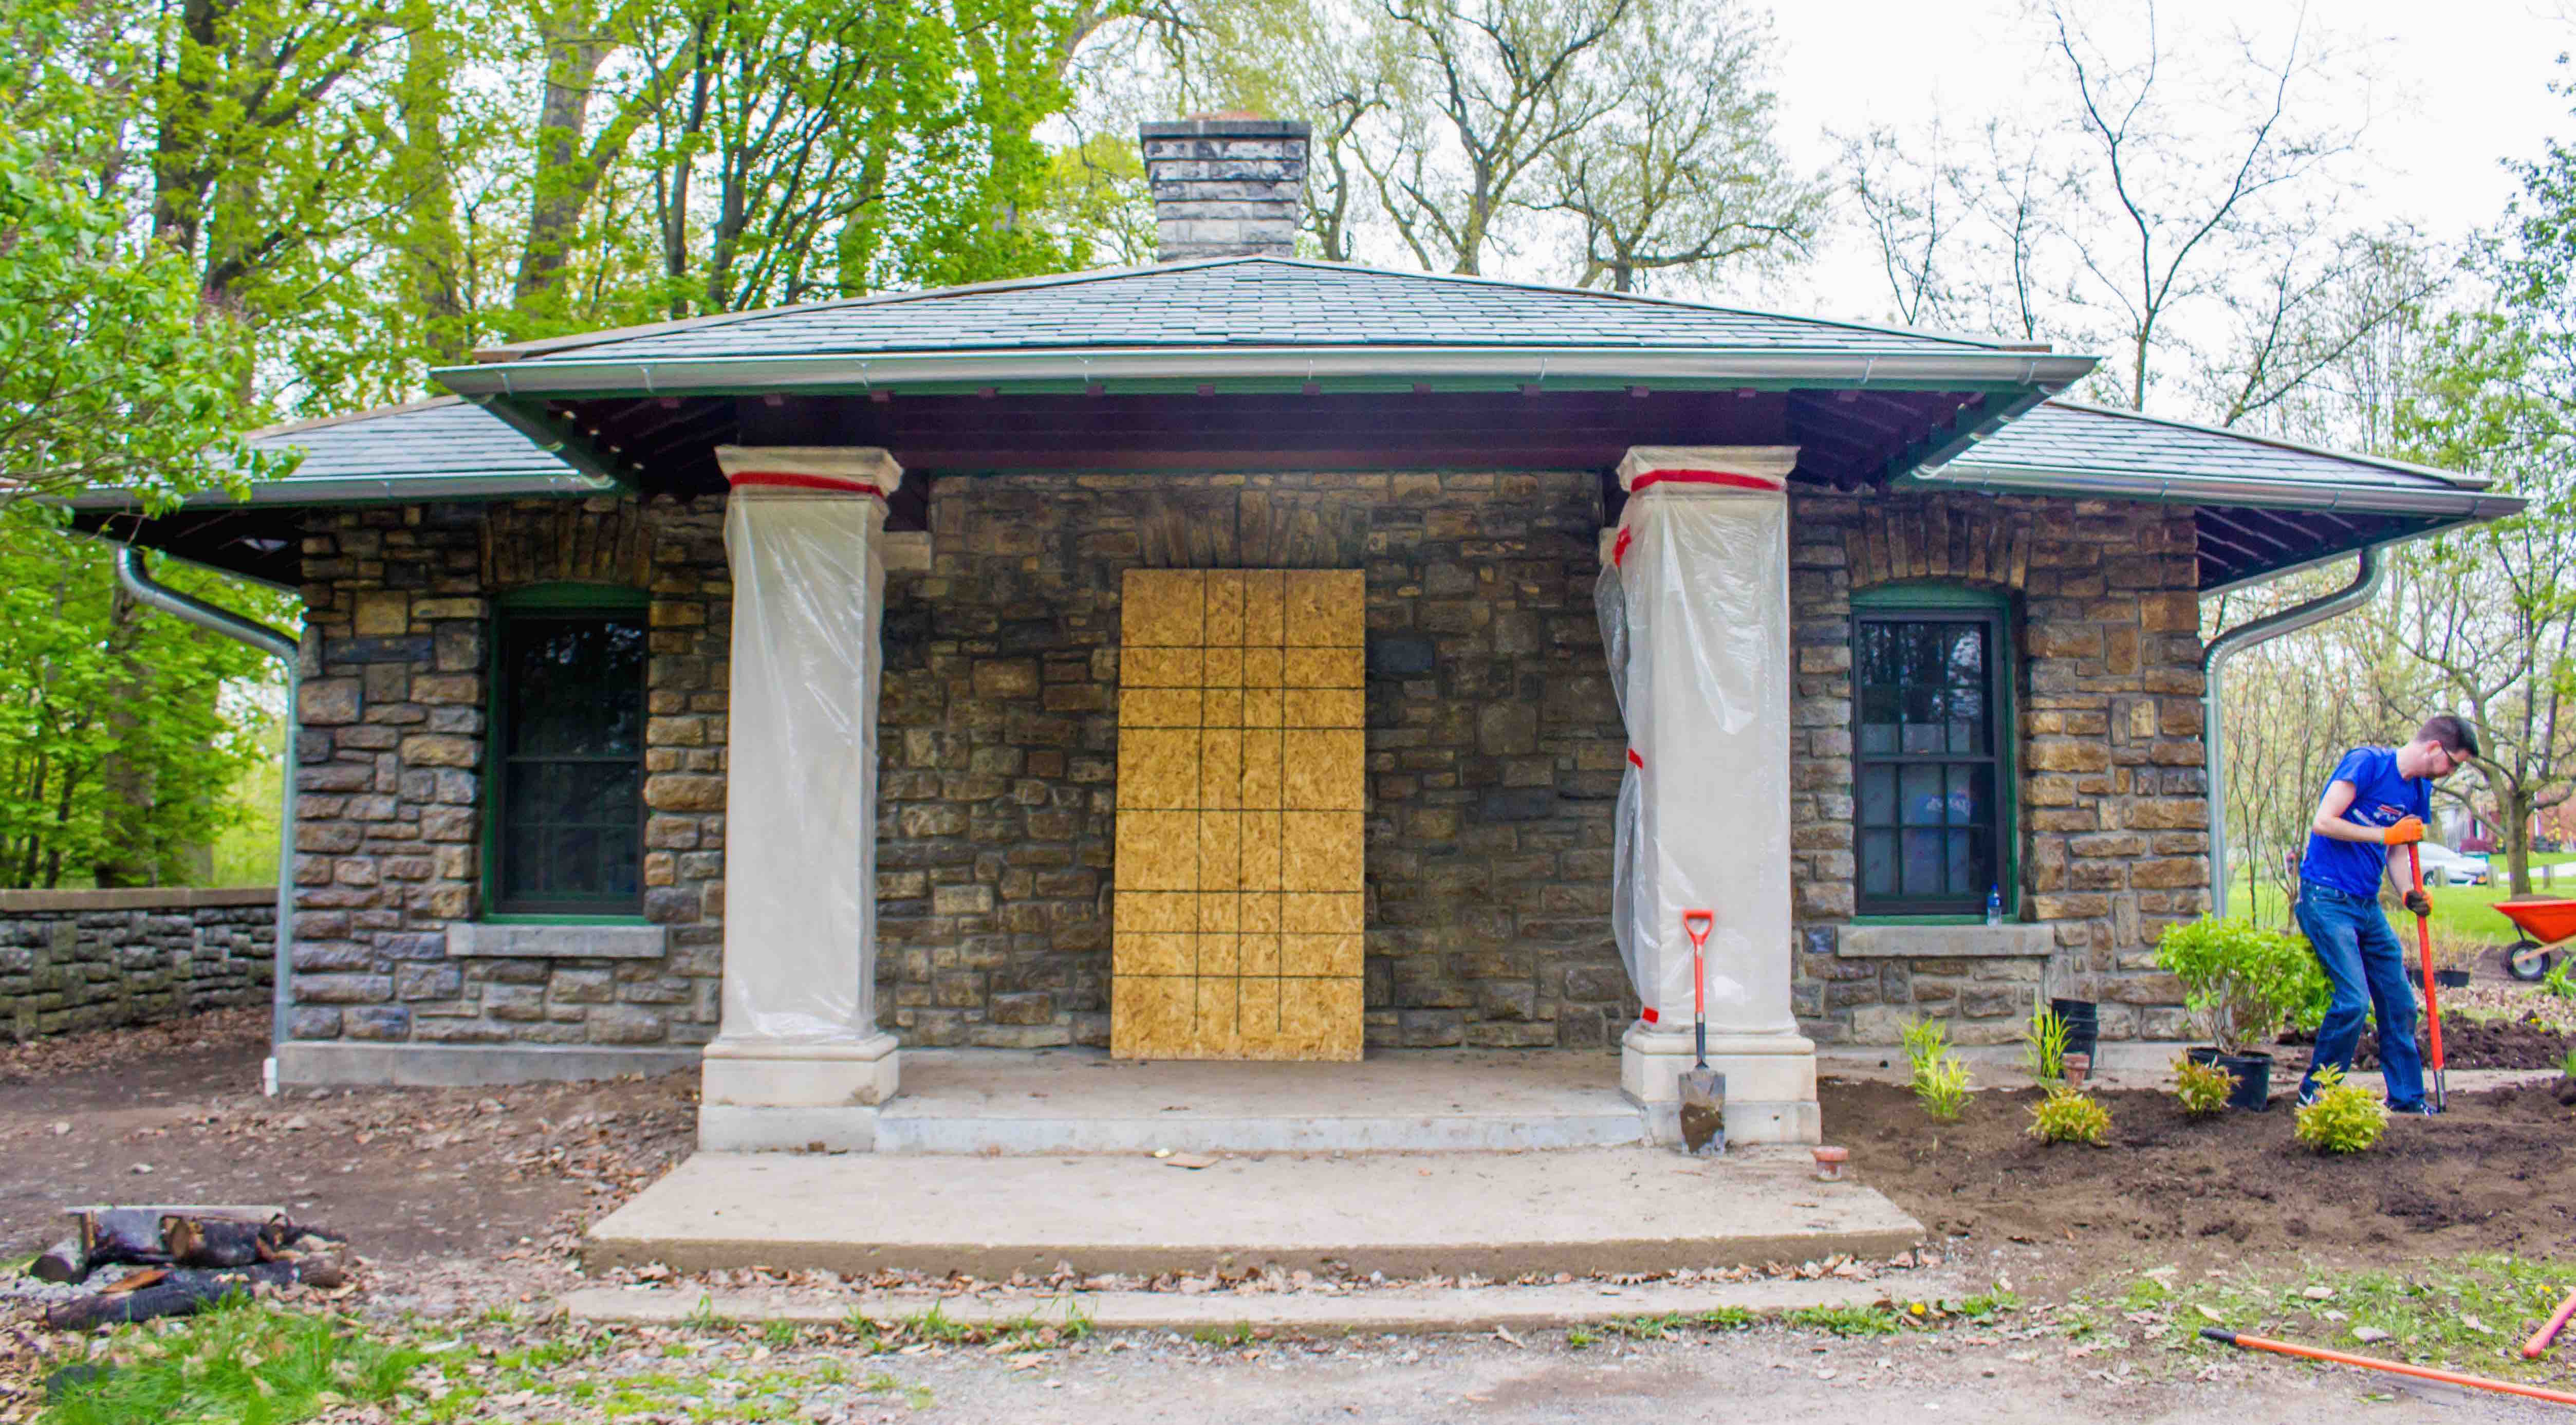 Rumsey Shelter - May 2019